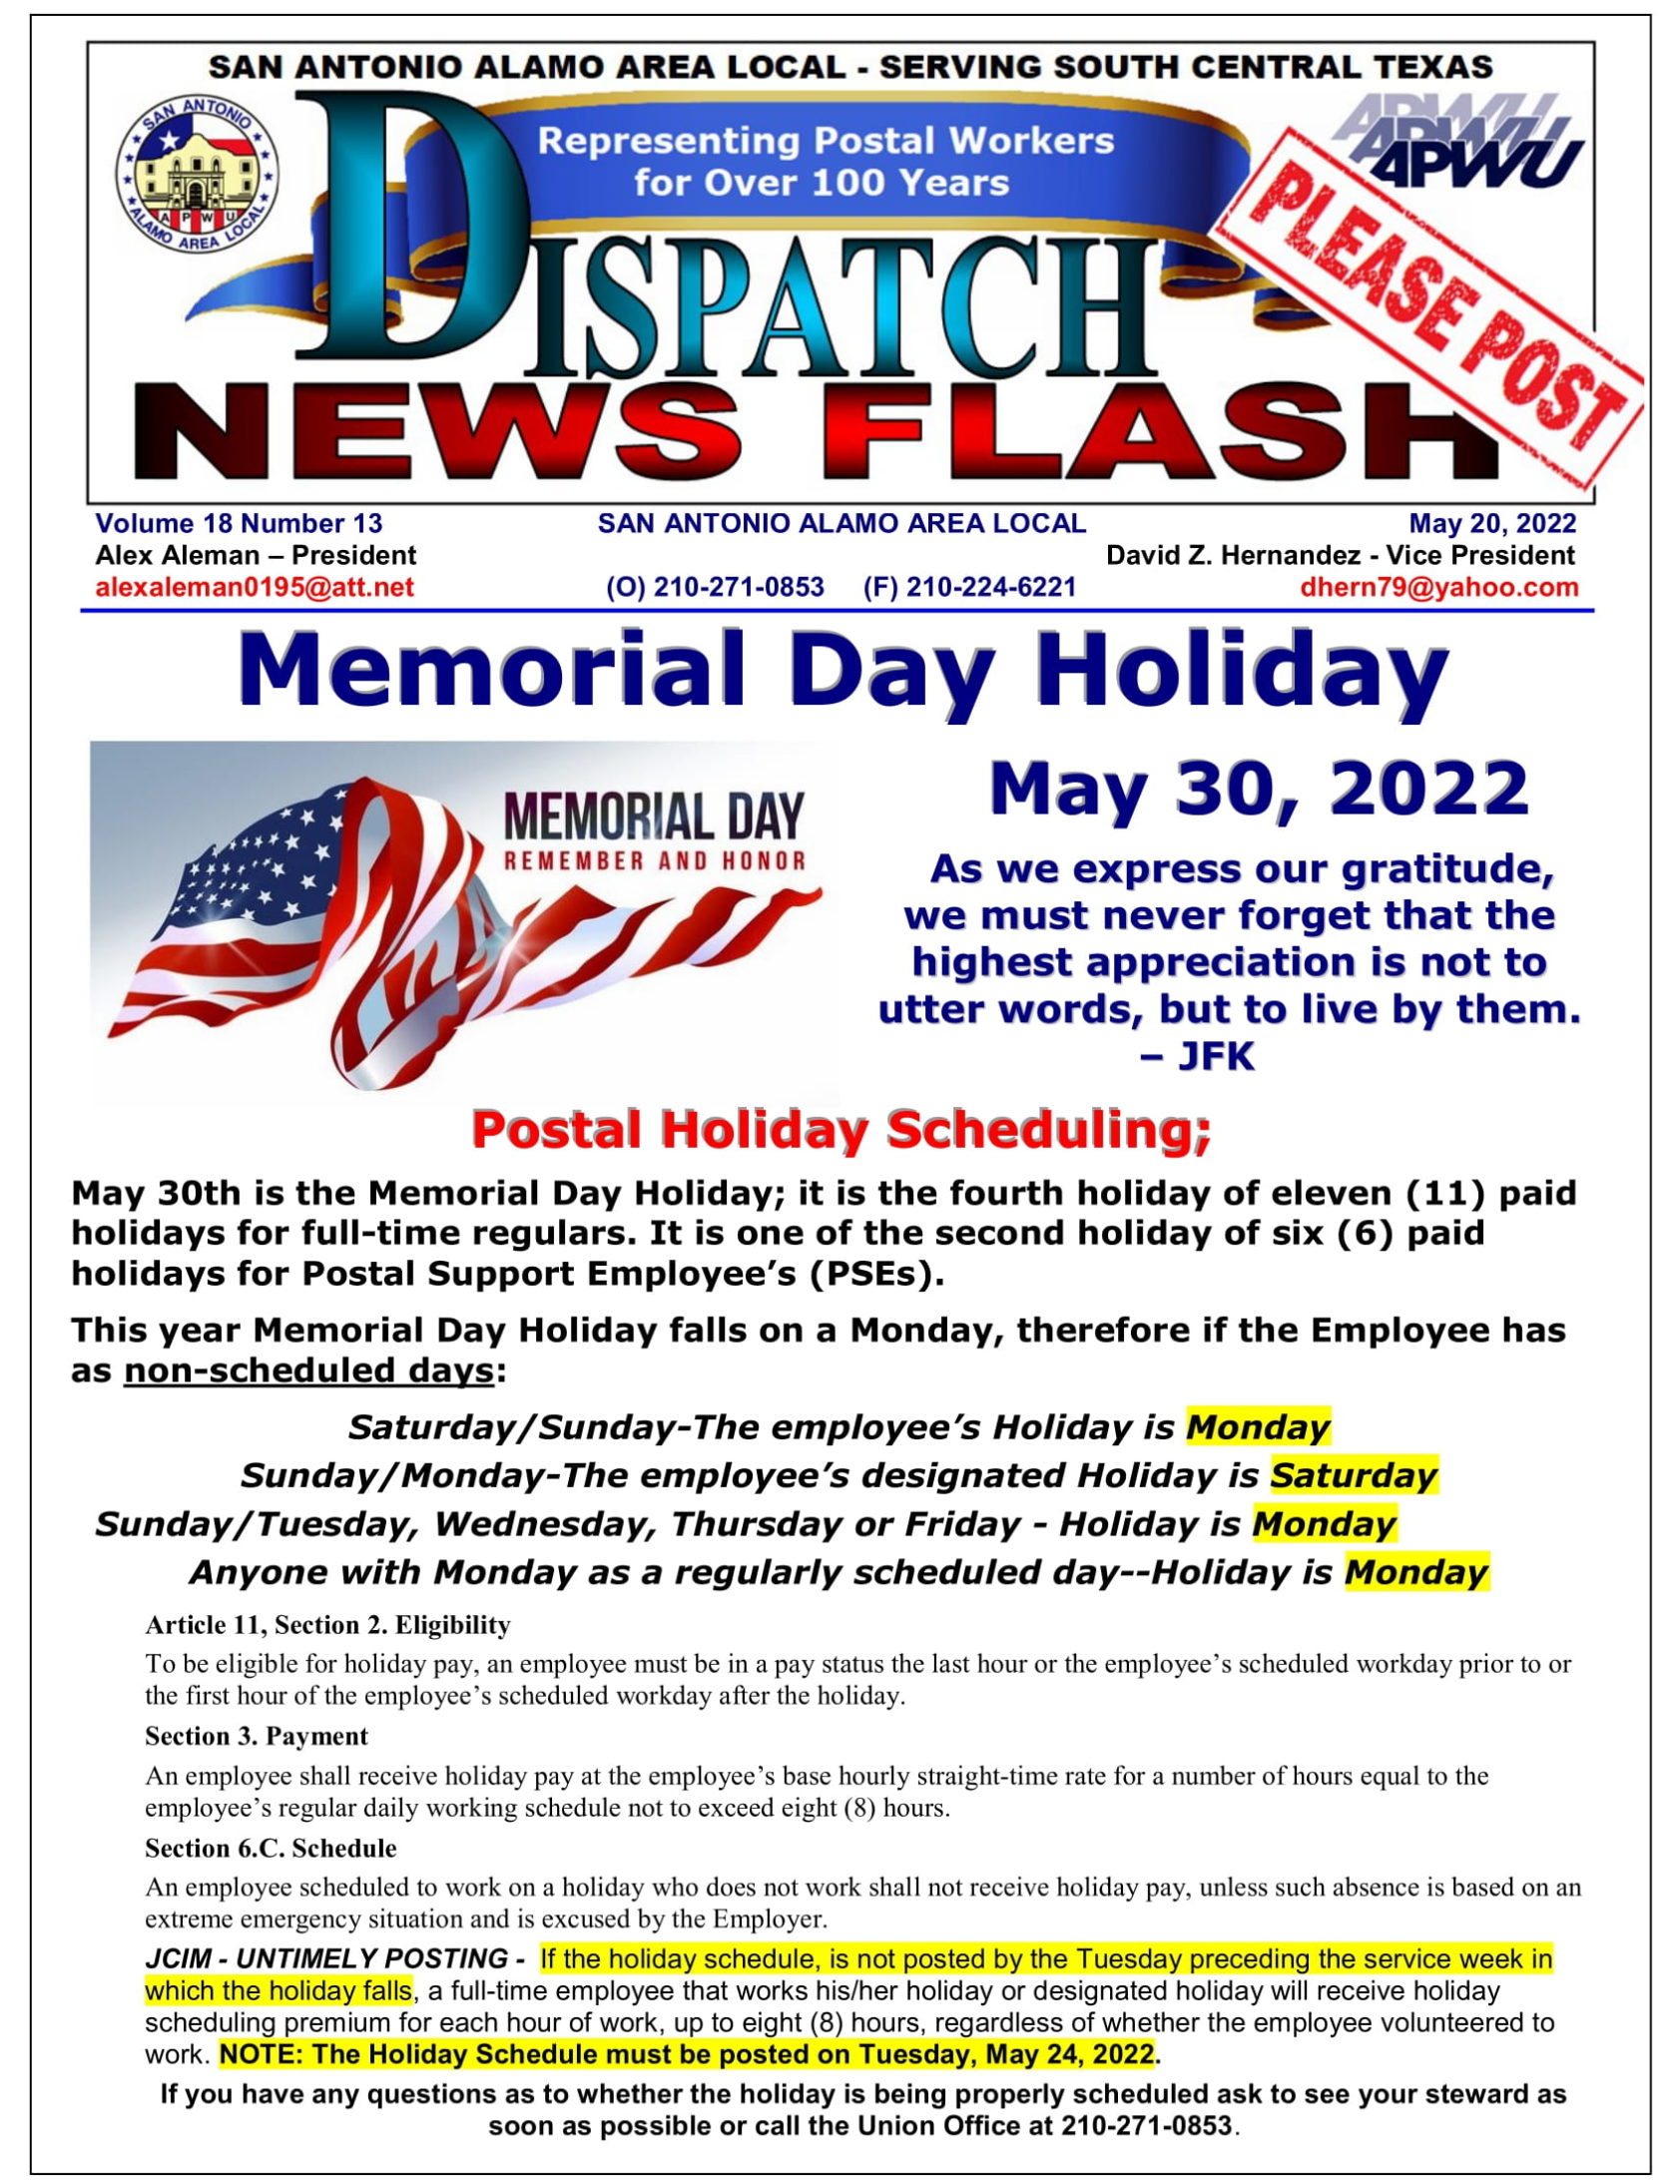 Memorial Day Holiday - 